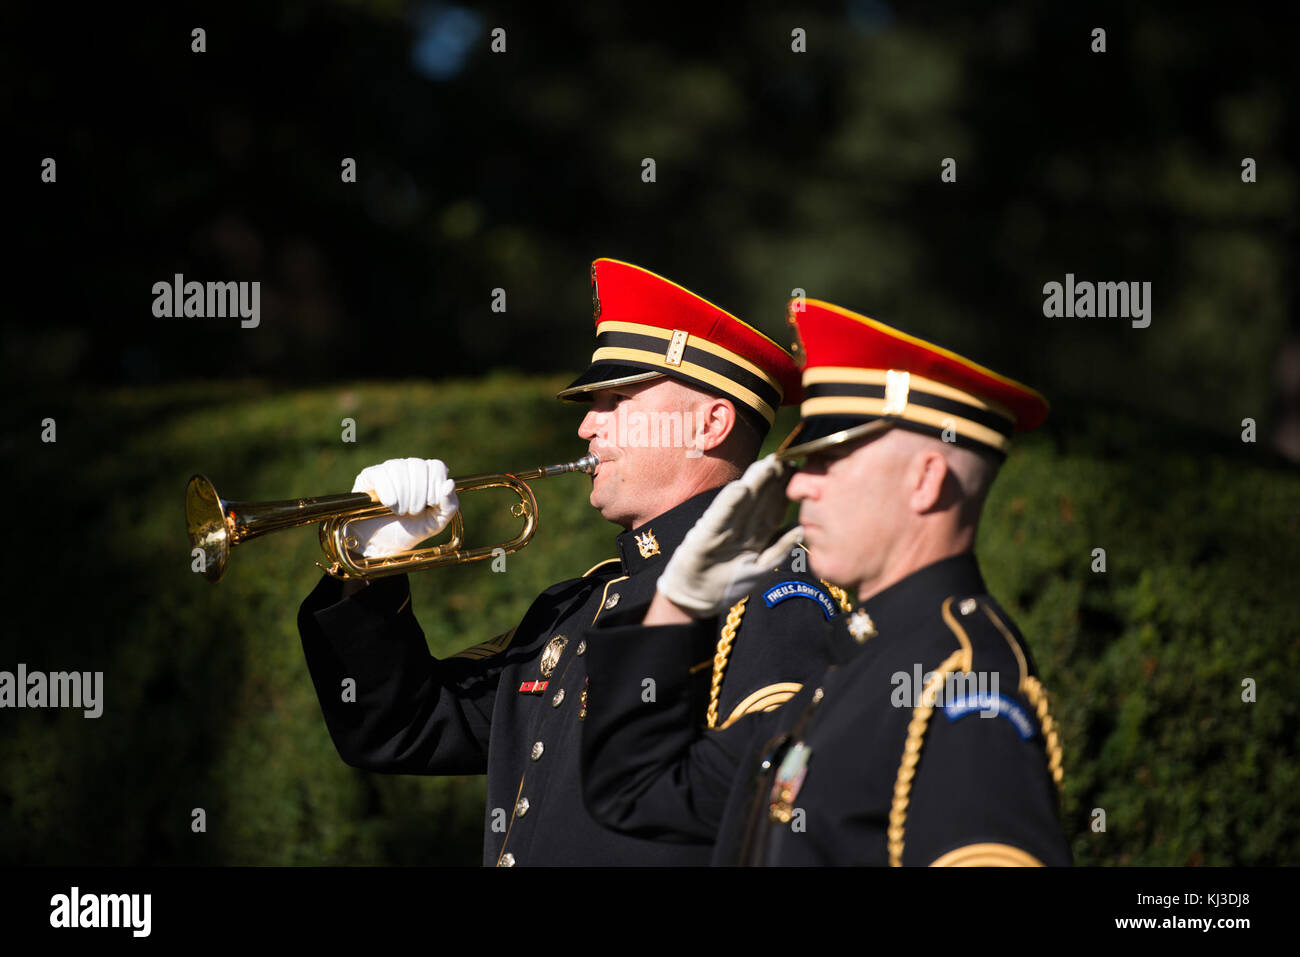 The U.S. Army Military District of Washington conducts a Presidential Armed Forces Full Honor Wreath-Laying Ceremony at the grave of President William H. Taft in Arlington National Cemetery to celebrate his 158th birt 0100 Stock Photo